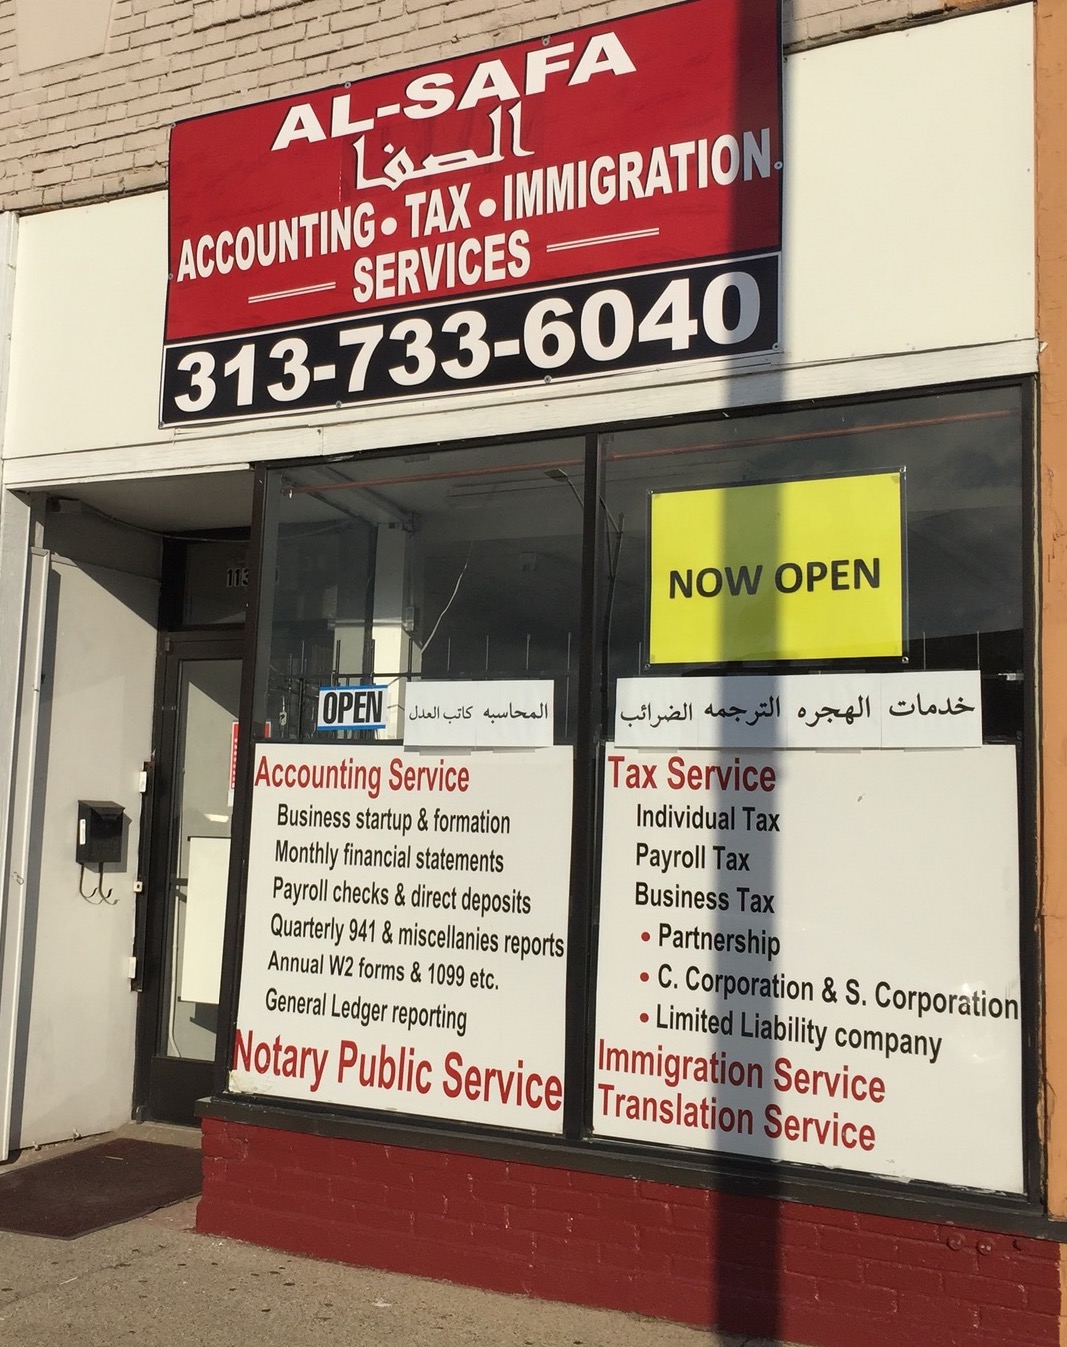 Al-Safa Accounting - Tax- Immigration & Notary public services